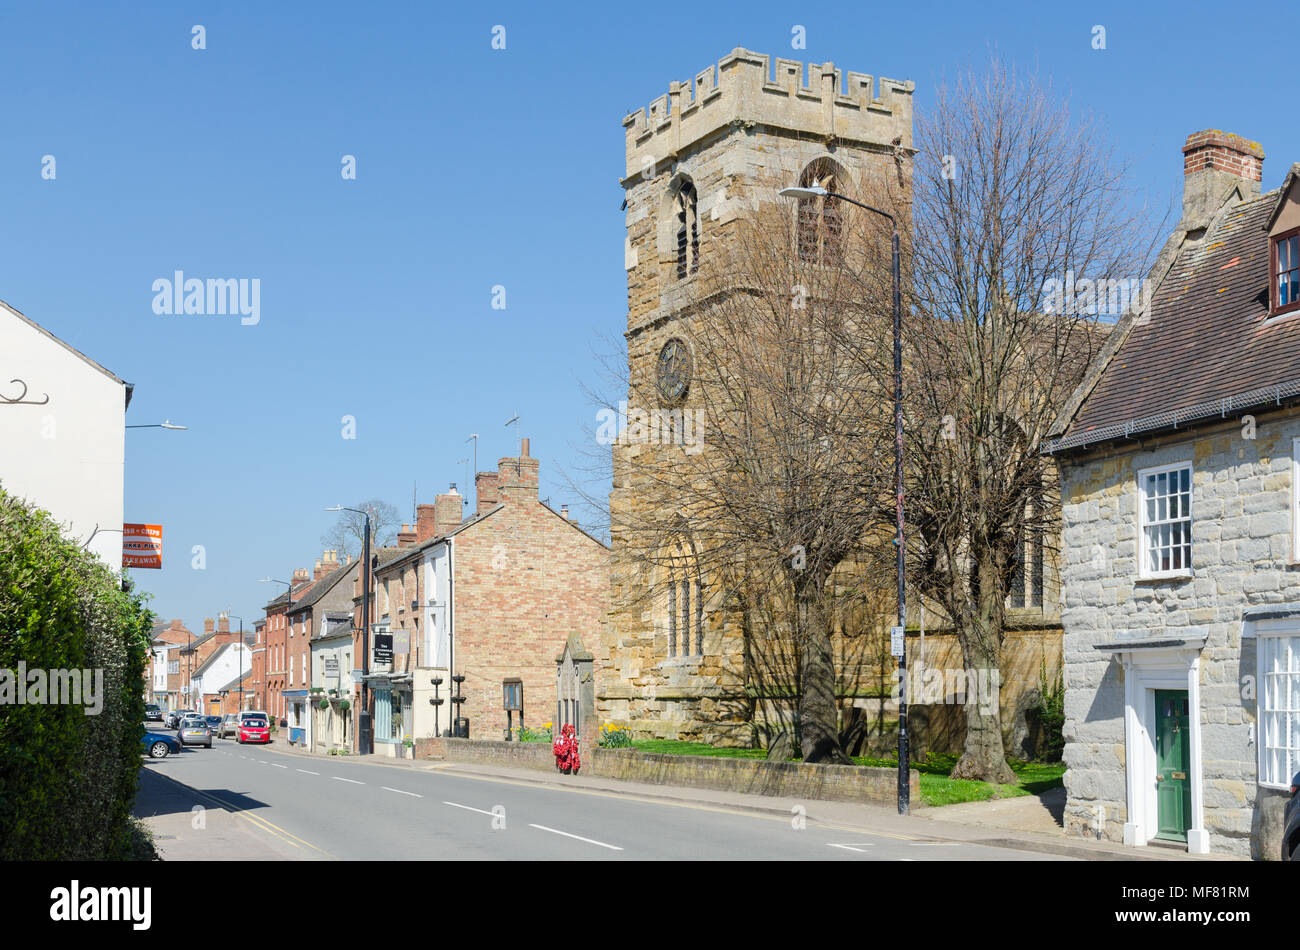 Saint Edmund, King and Martyr Church in the pretty market town of Shipston-on-Stour in Warwickshire,UK Stock Photo